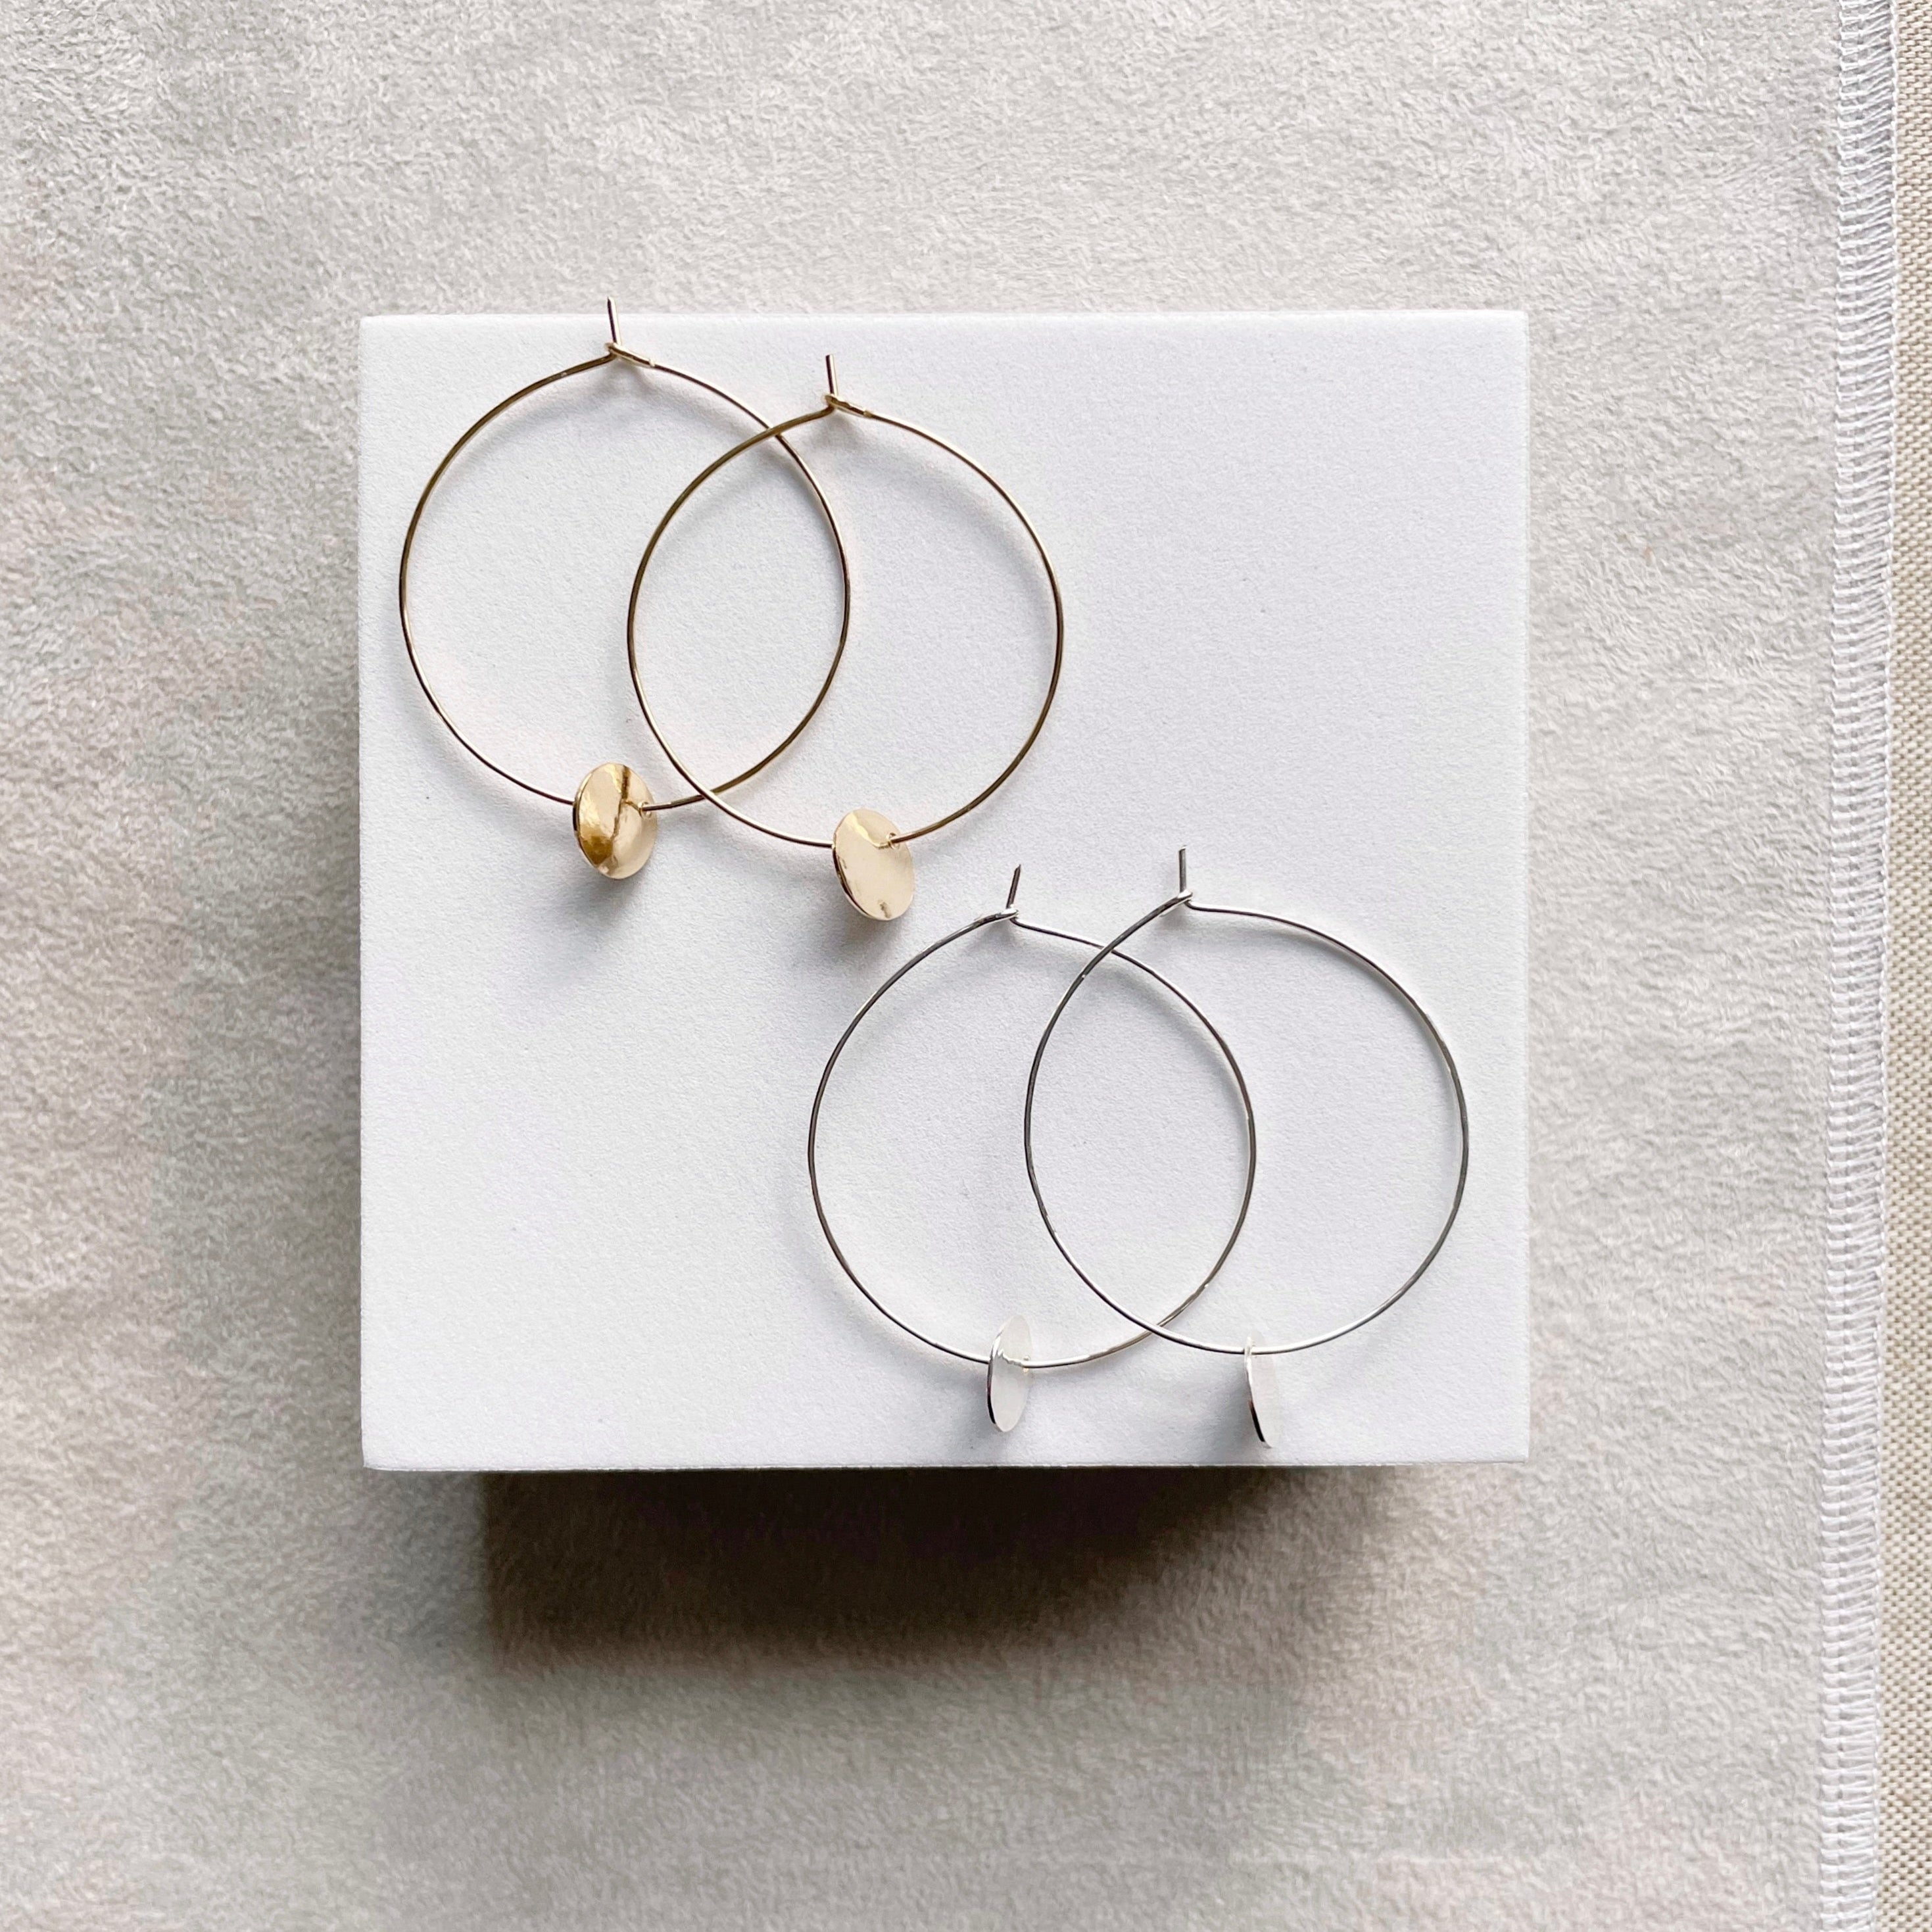 Amalee Earrings by Sarah Cornwell Jewelry. 2 pairs of gold and silver classic 1.5 inch gold hoop earrings with small gold textured discs hanging from the bottoms on a white background.